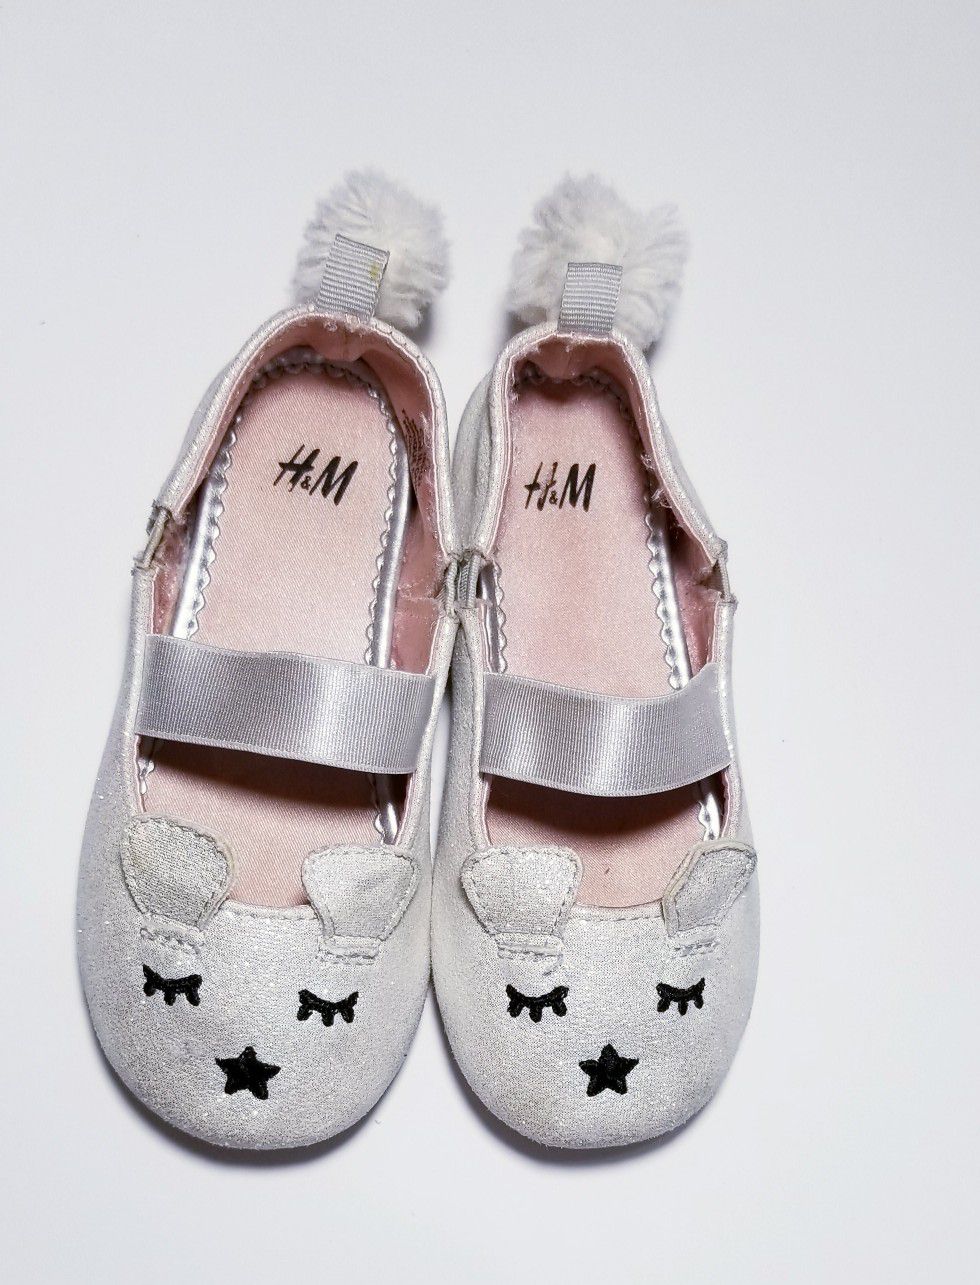 H&M Toddler Shoes Size: 7.5